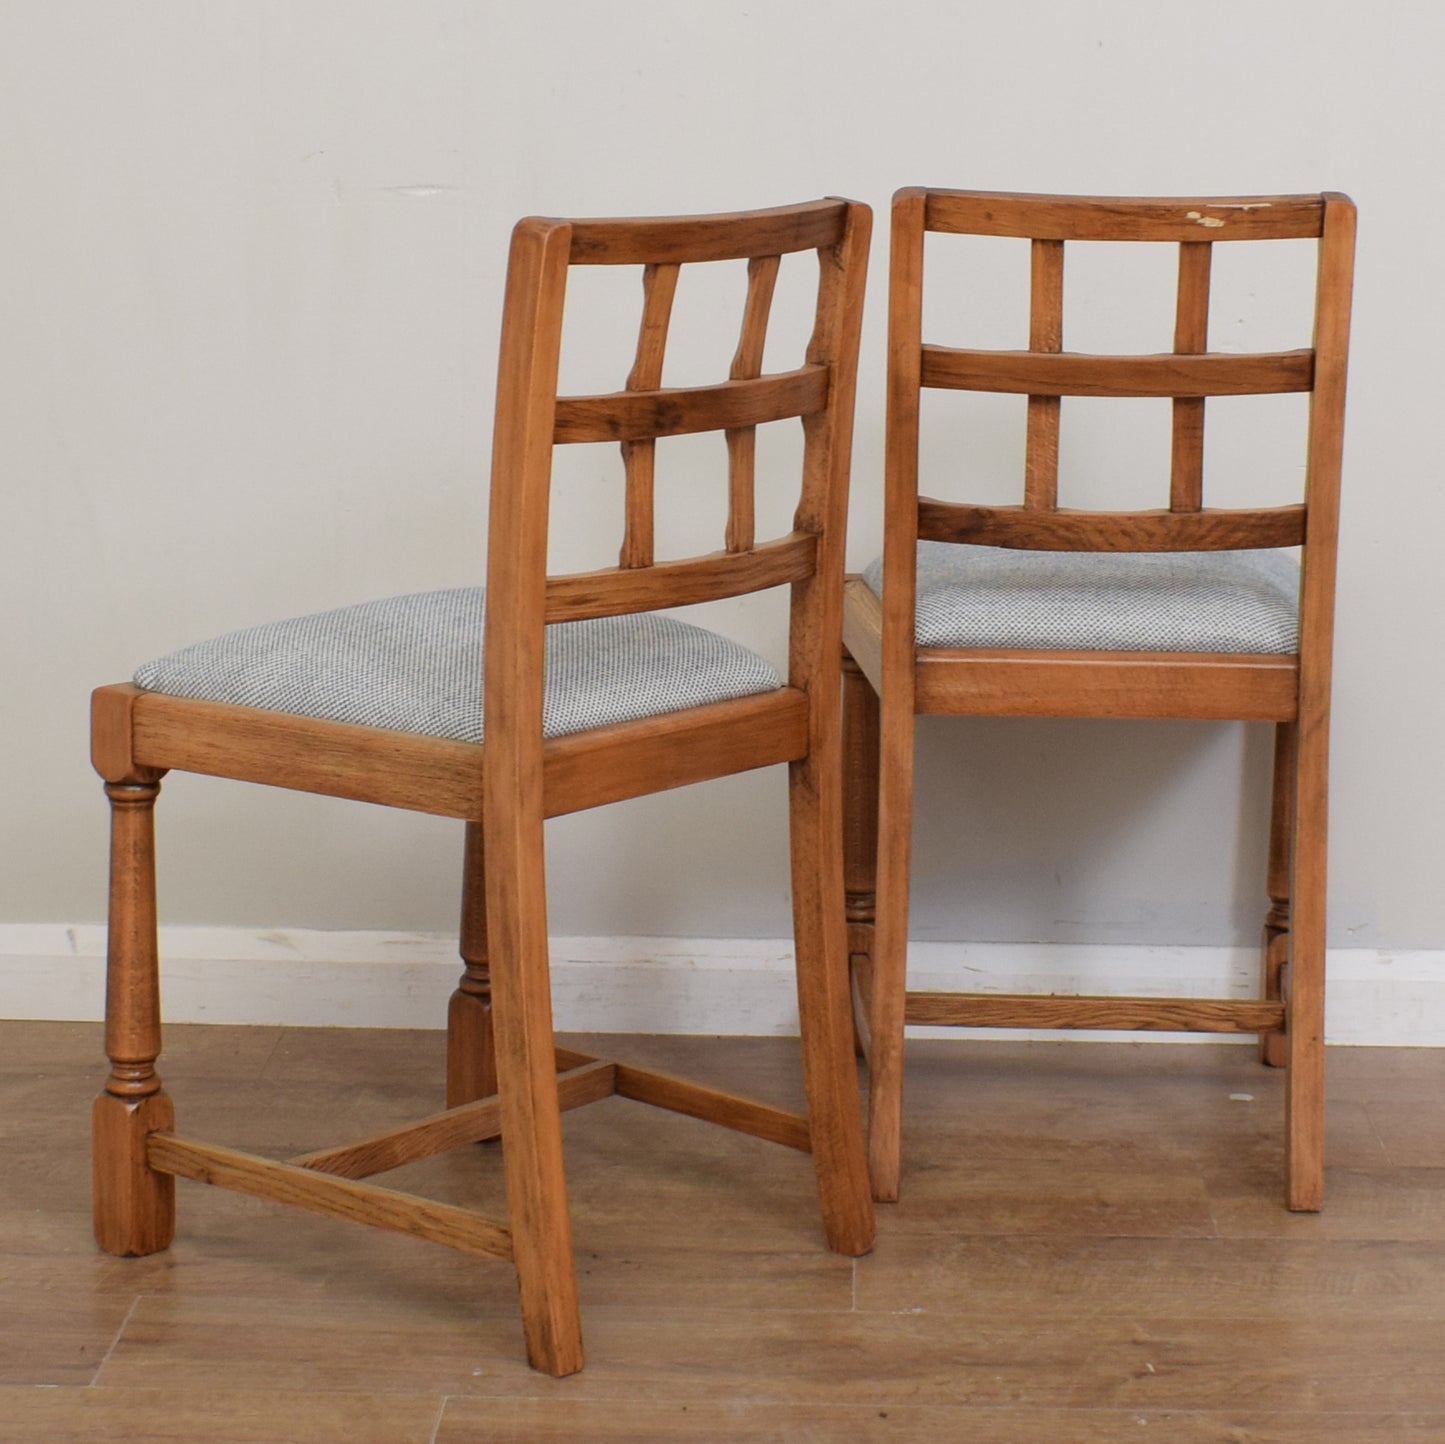 Restored Drop Leaf Table And Four Chairs